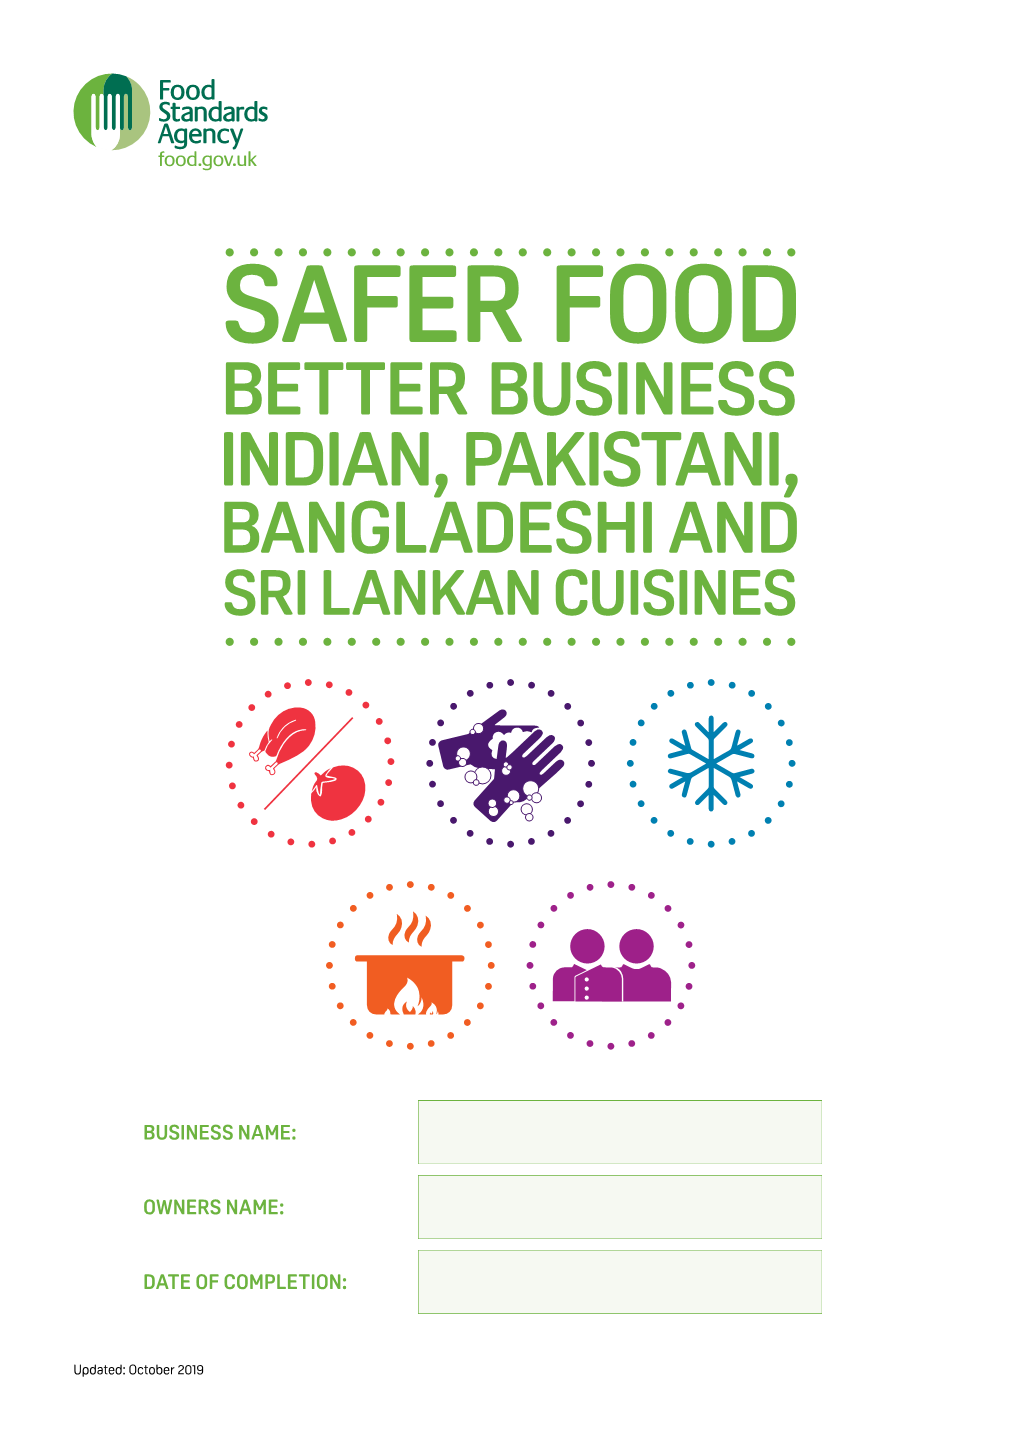 Safer Food Better Business for Indian Packistani Bangladeshi and Sri